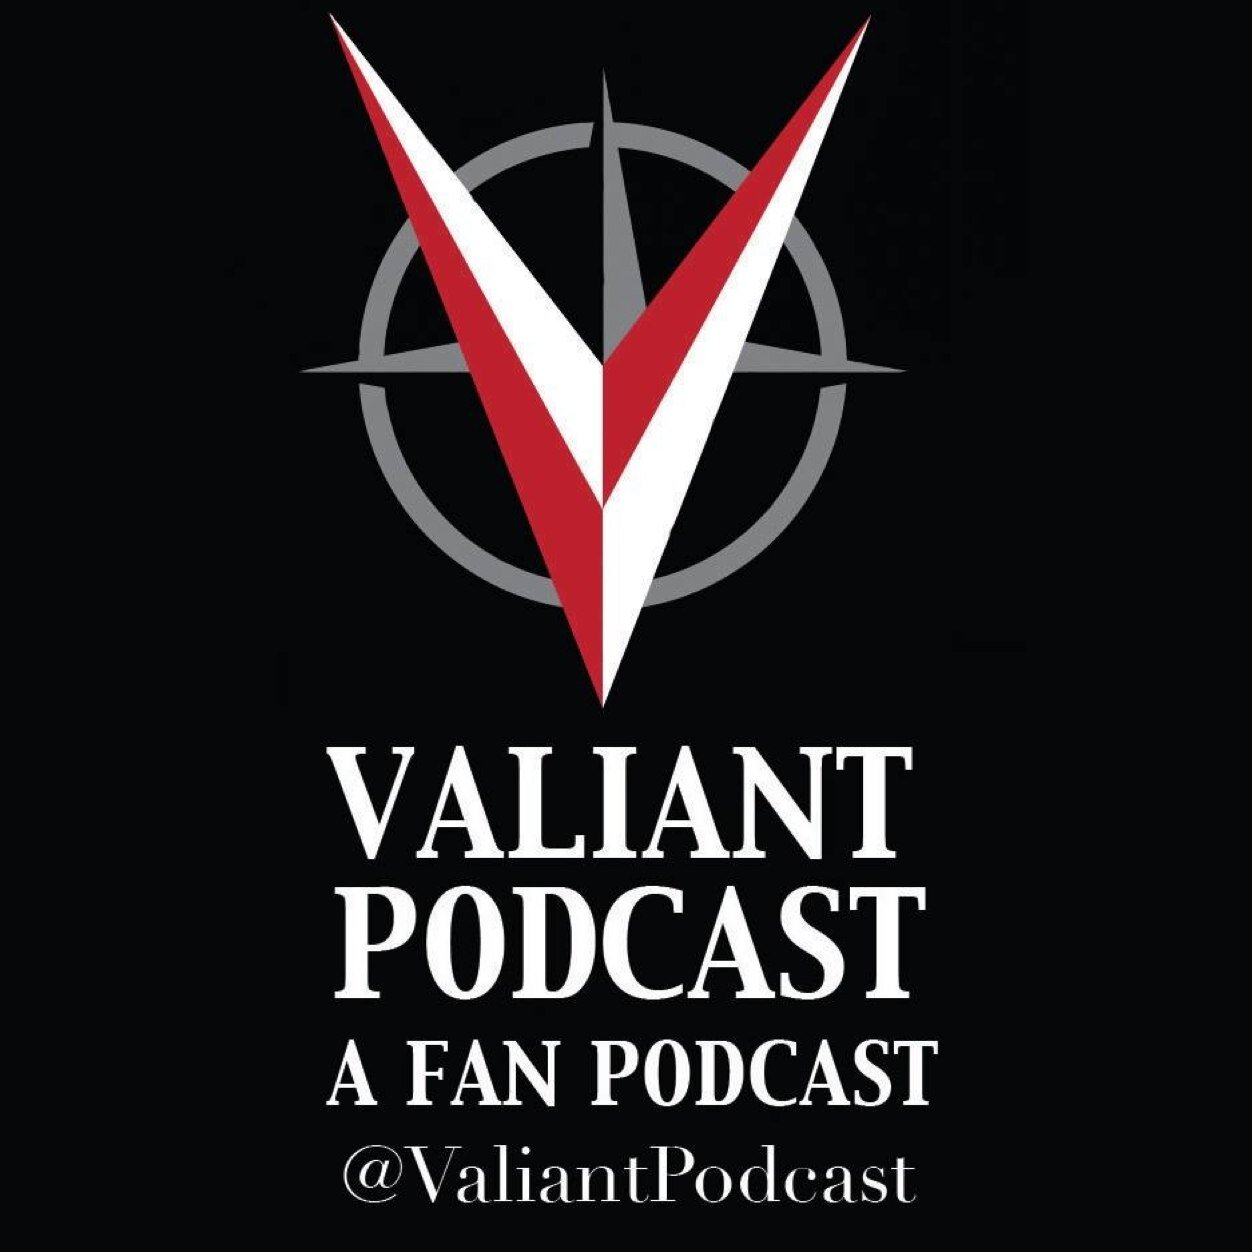 A very fun and entertaining podcast that covers all the current #Valiant #comics . #Valiantentertainment available on iTunes and streaming off our website.